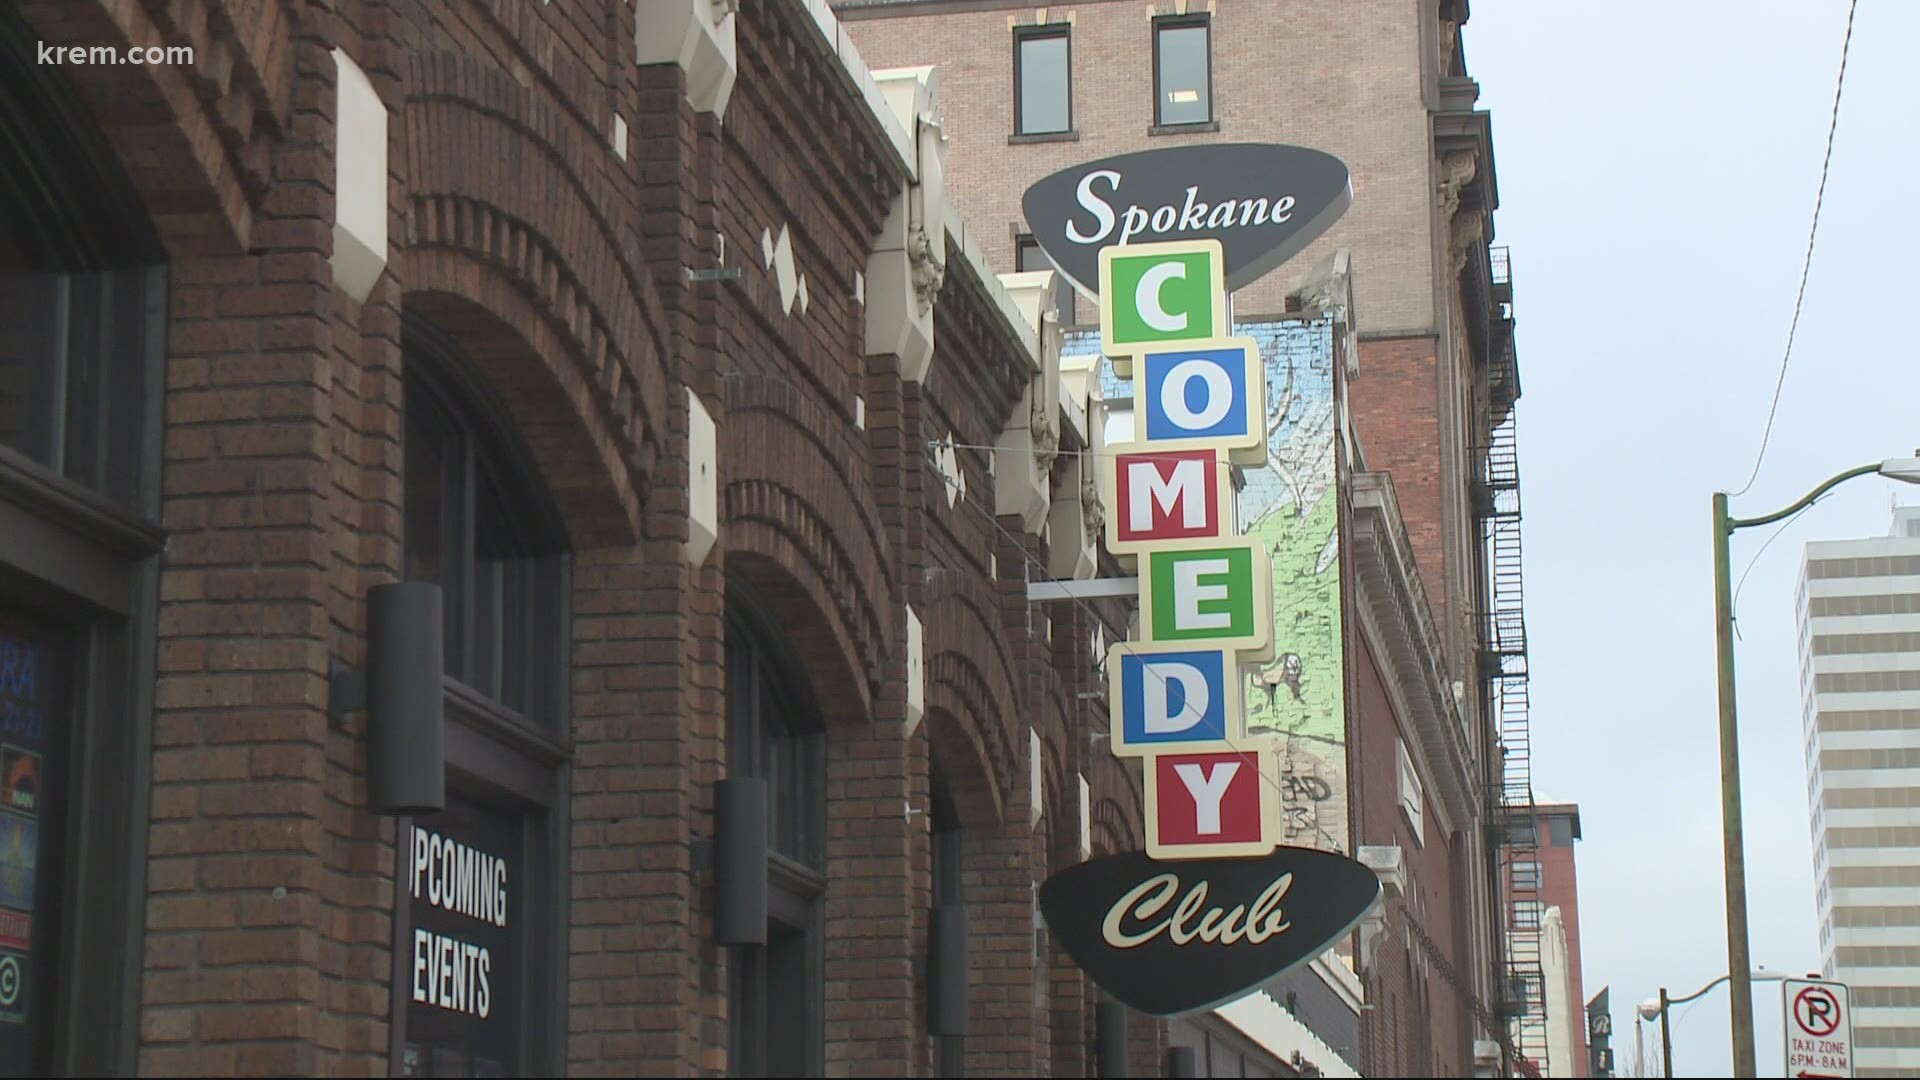 Spokane Comedy Club continues to pivot its business model with entertainment still banned due to COVID-19 restrictions.